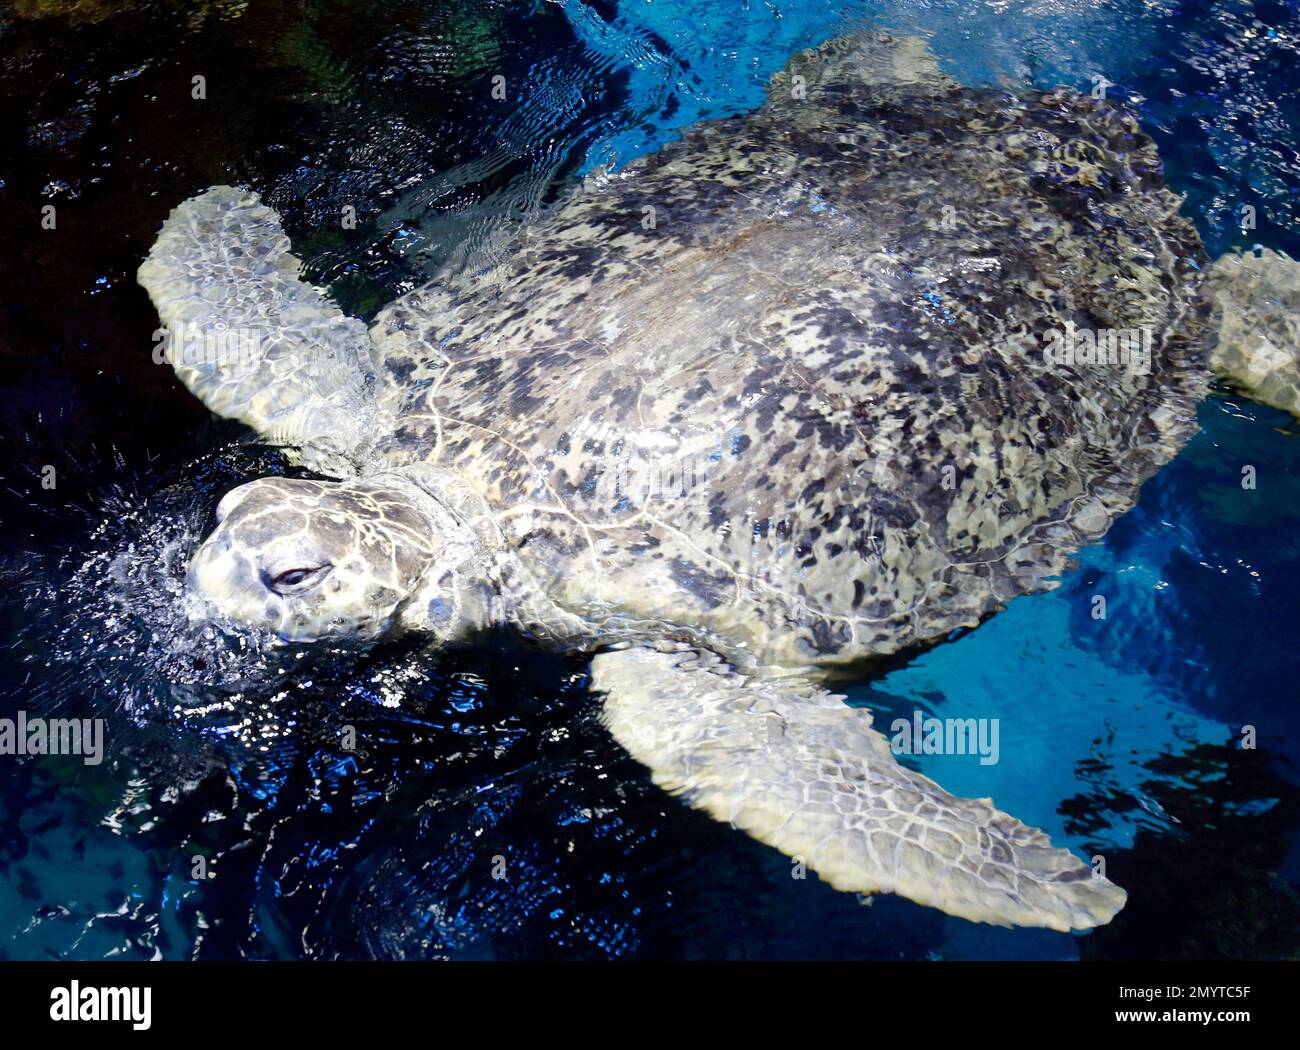 Myrtle, a green sea turtle estimated to be almost 90 years old